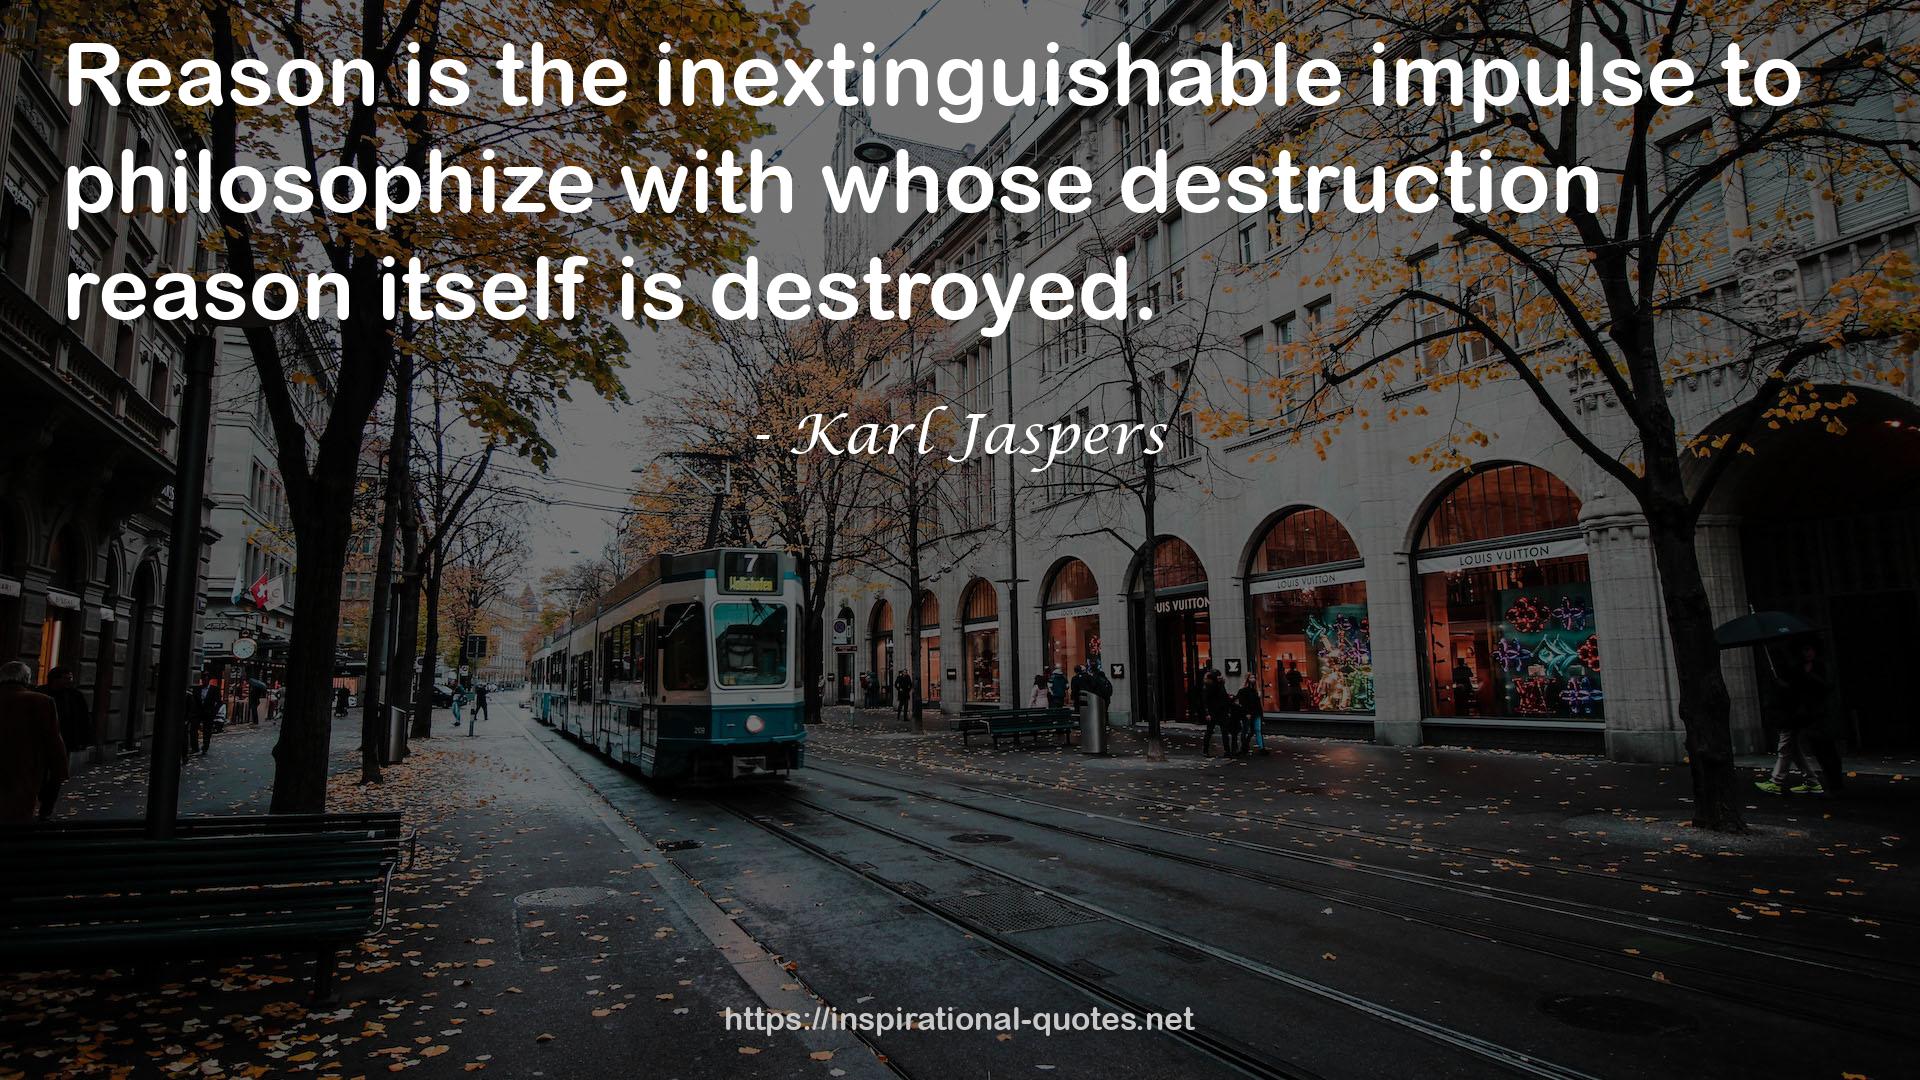 Karl Jaspers QUOTES